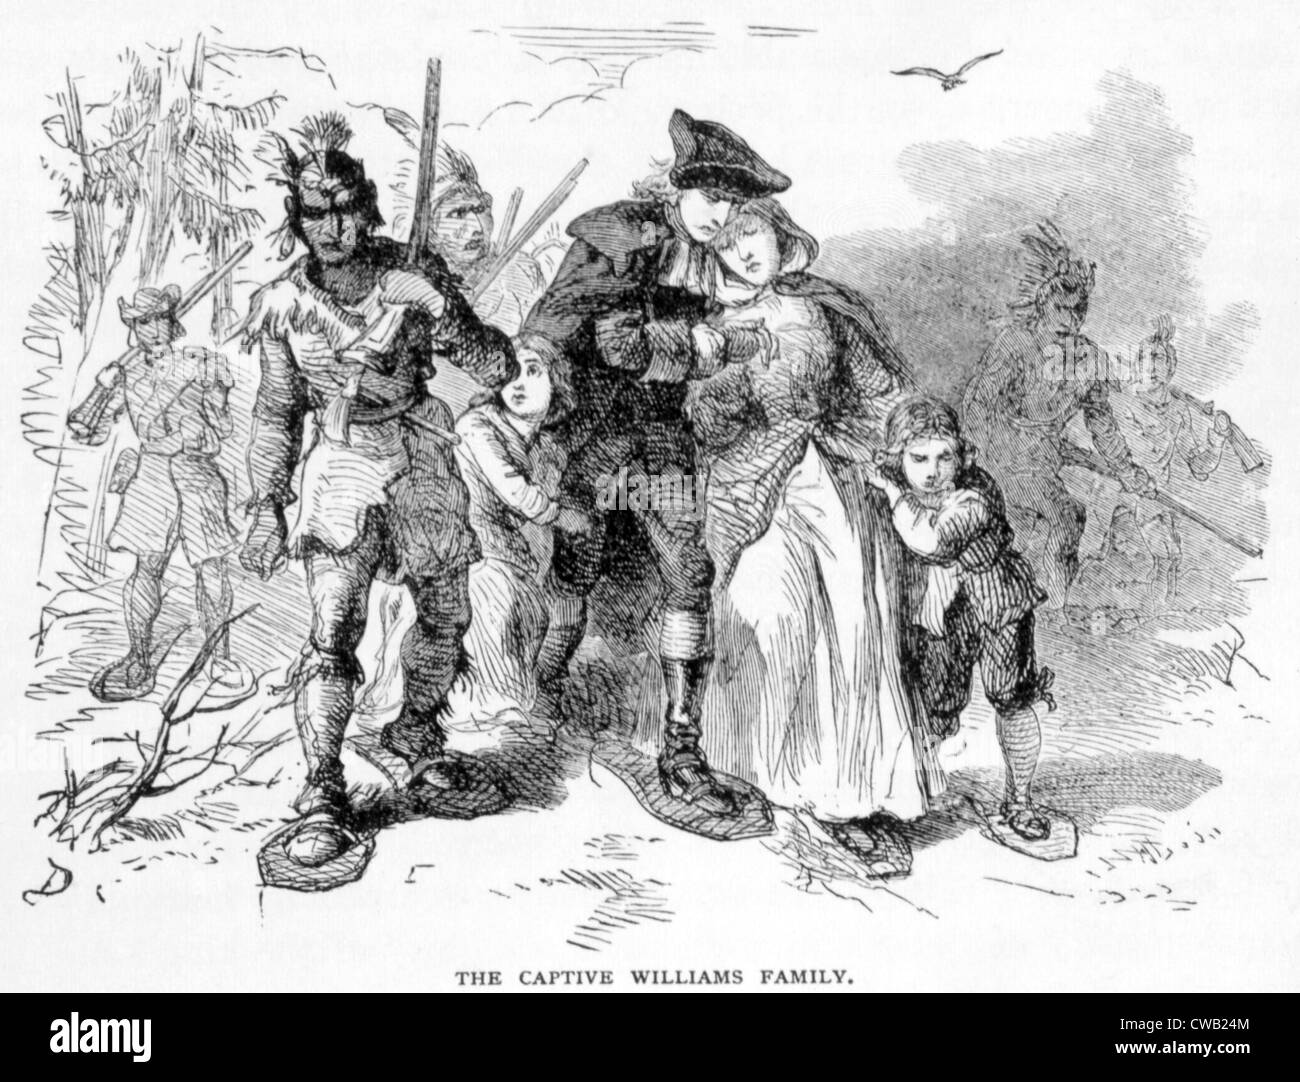 Reverand John Williams and his family captured by Indians in Deerfield, Massachusetts, 1704, engraving 1877 Stock Photo